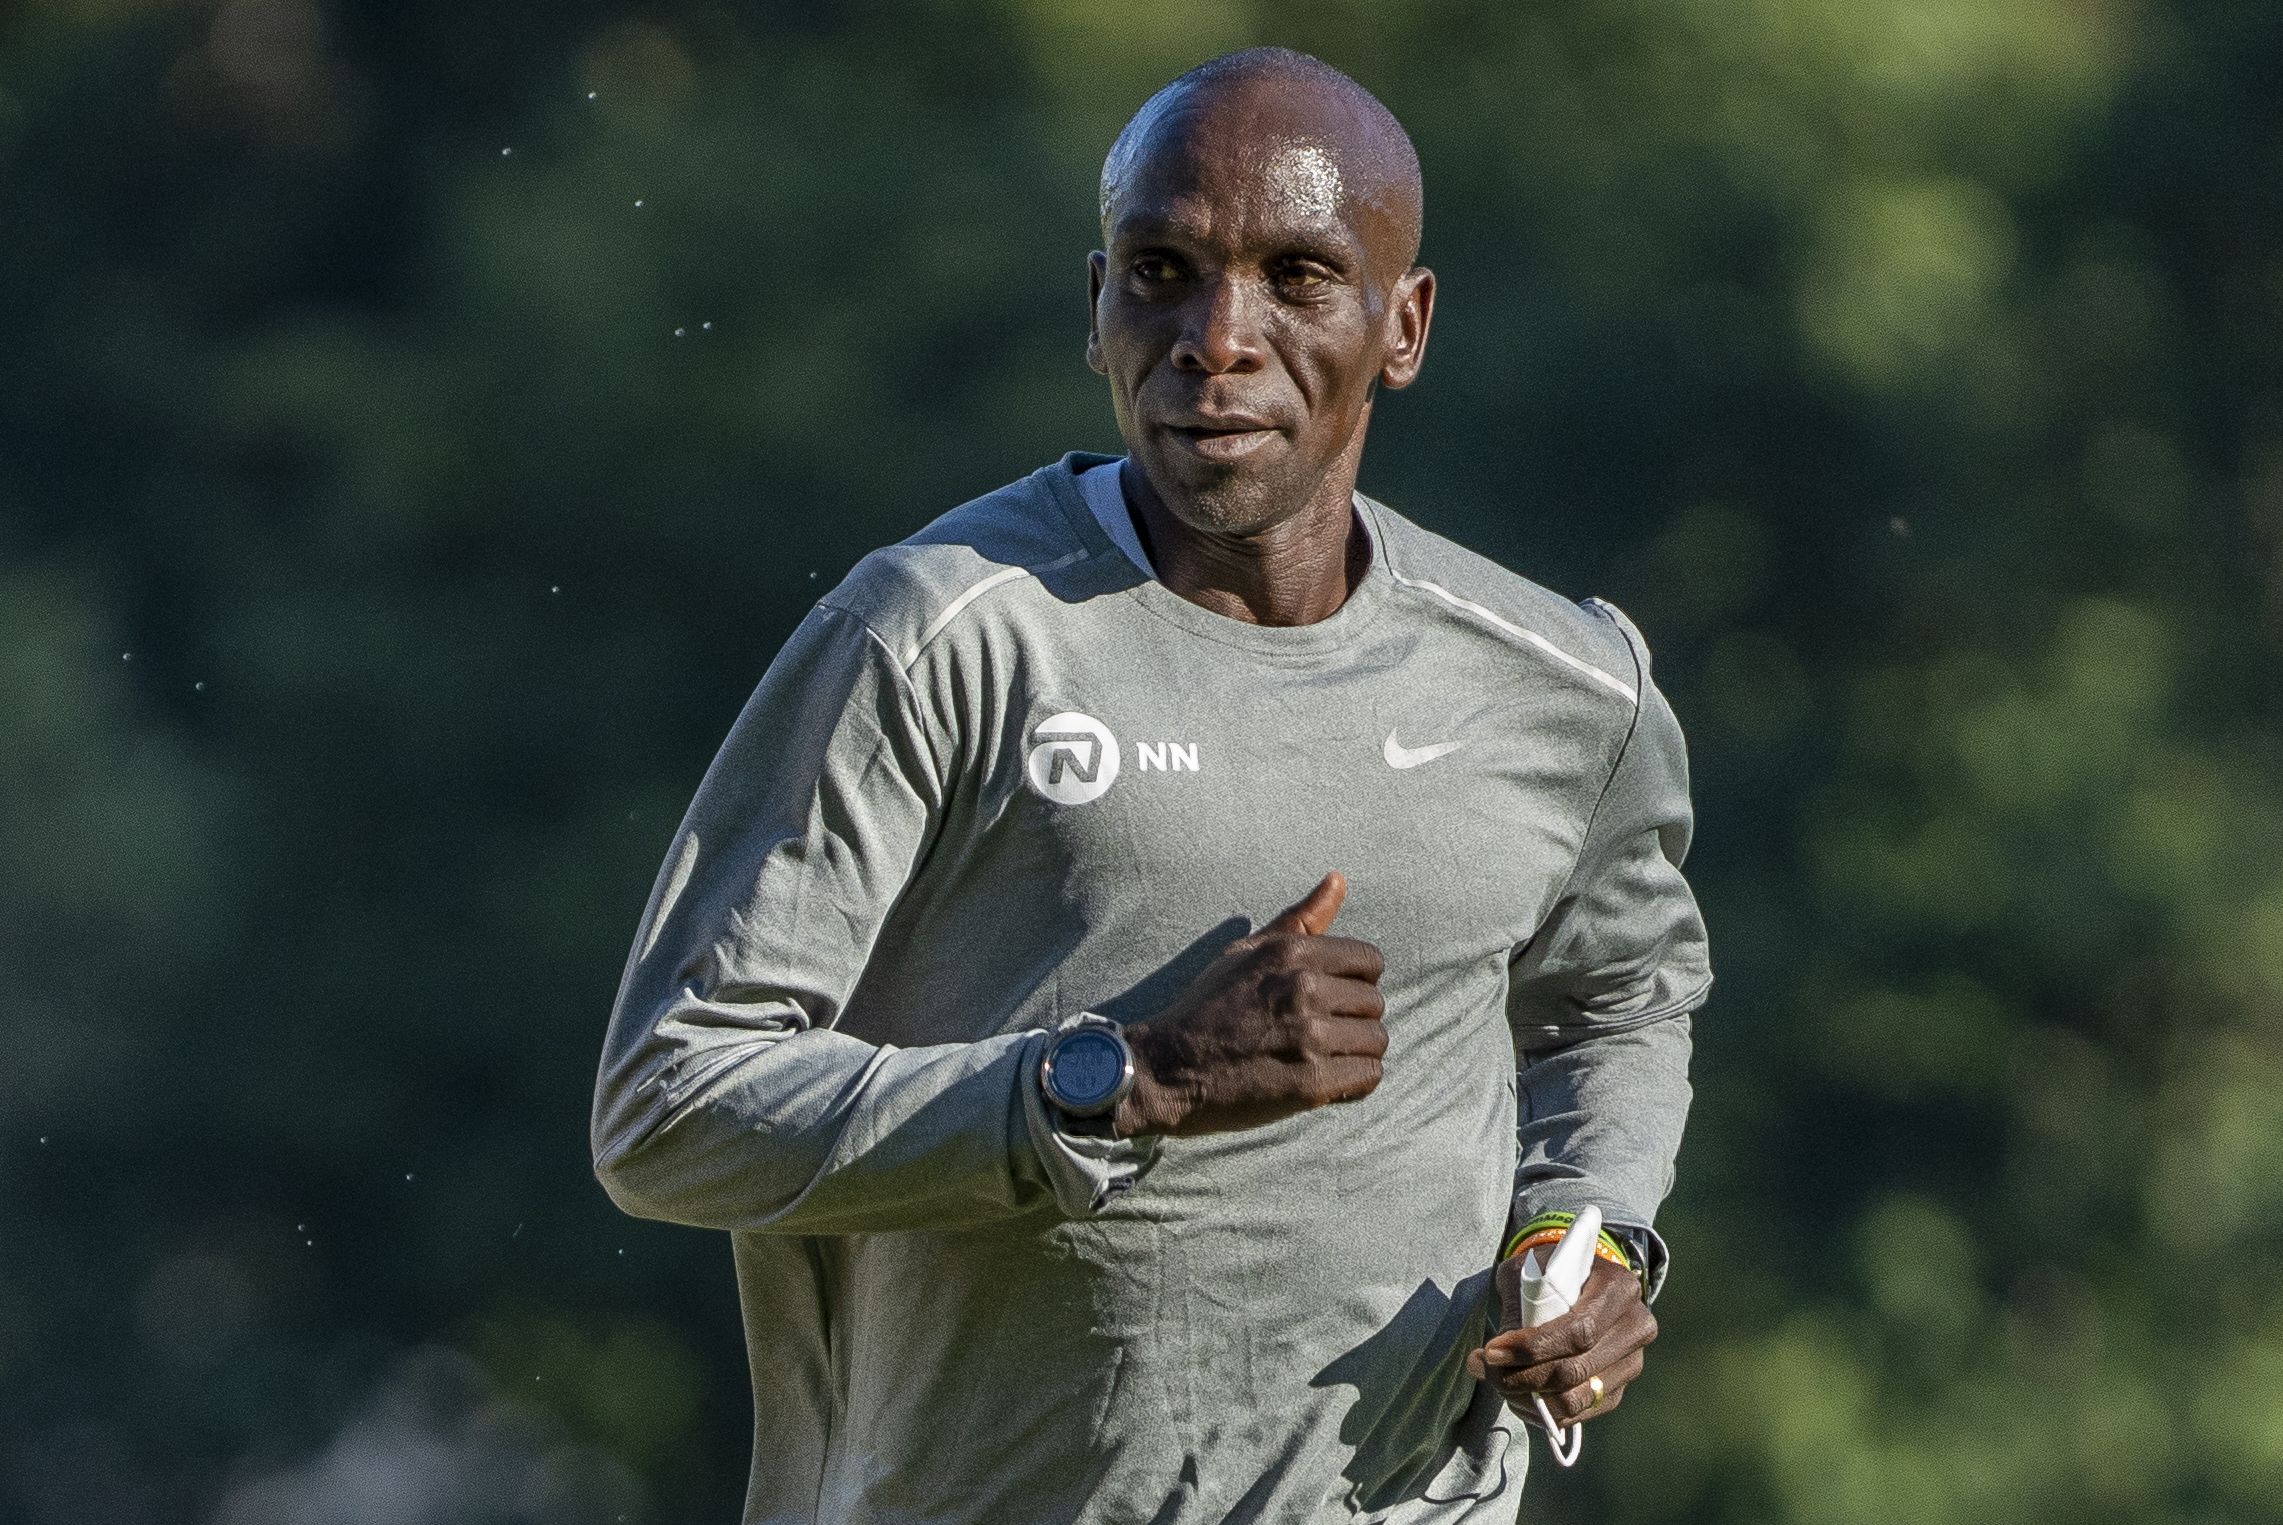 Eliud Kipchoge will wear Nike's controversial shoe for first time